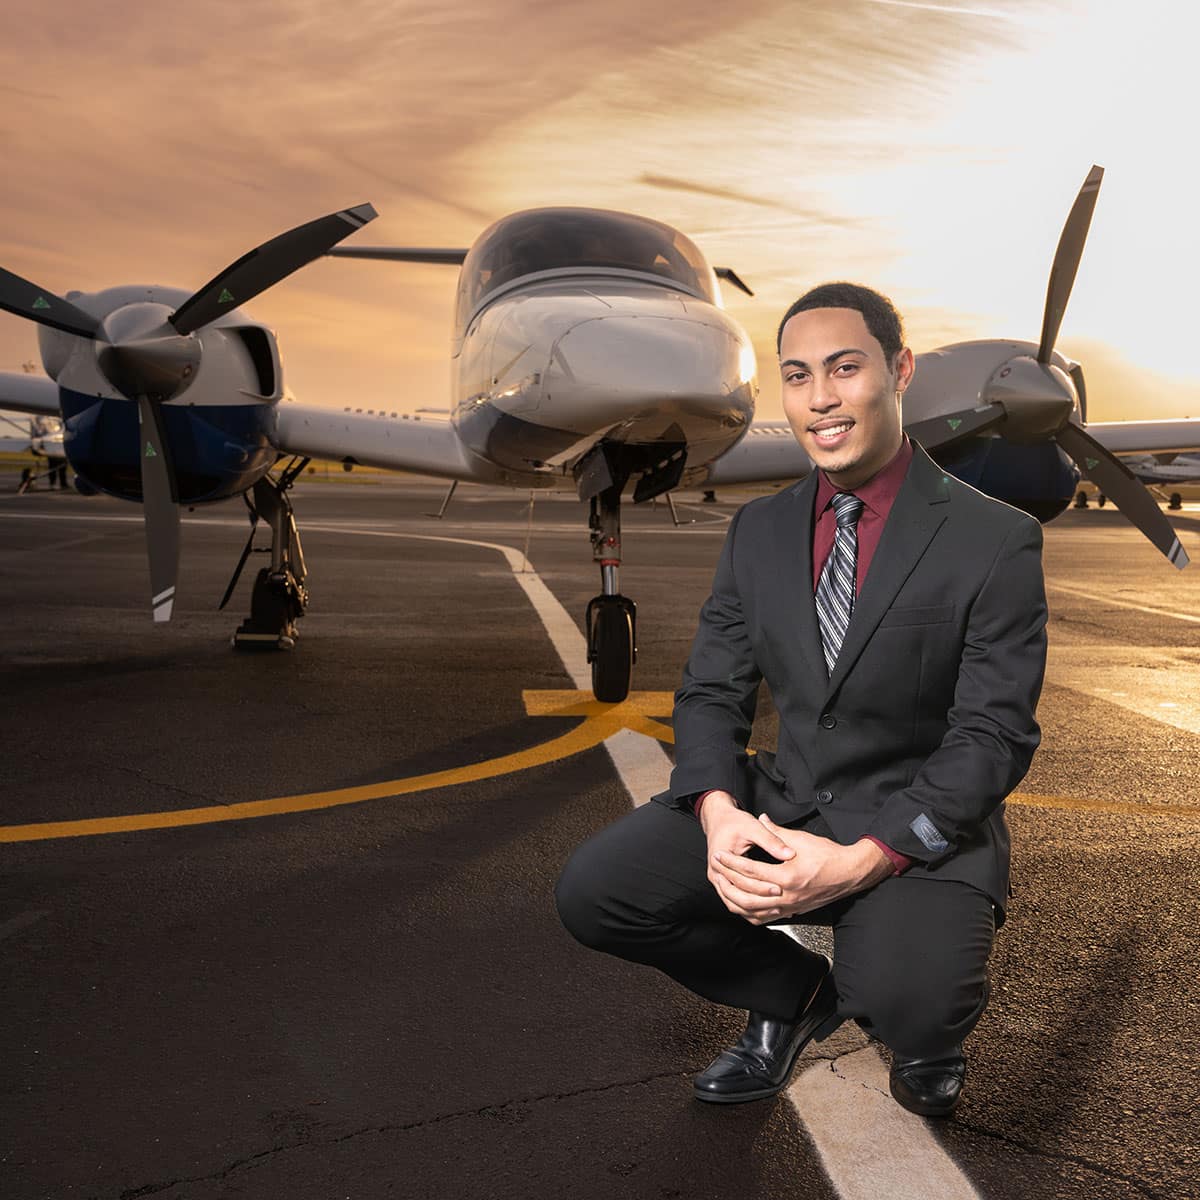 Dariel, wearing a black business suit and tie, crouches in front of an aircraft at sunset.